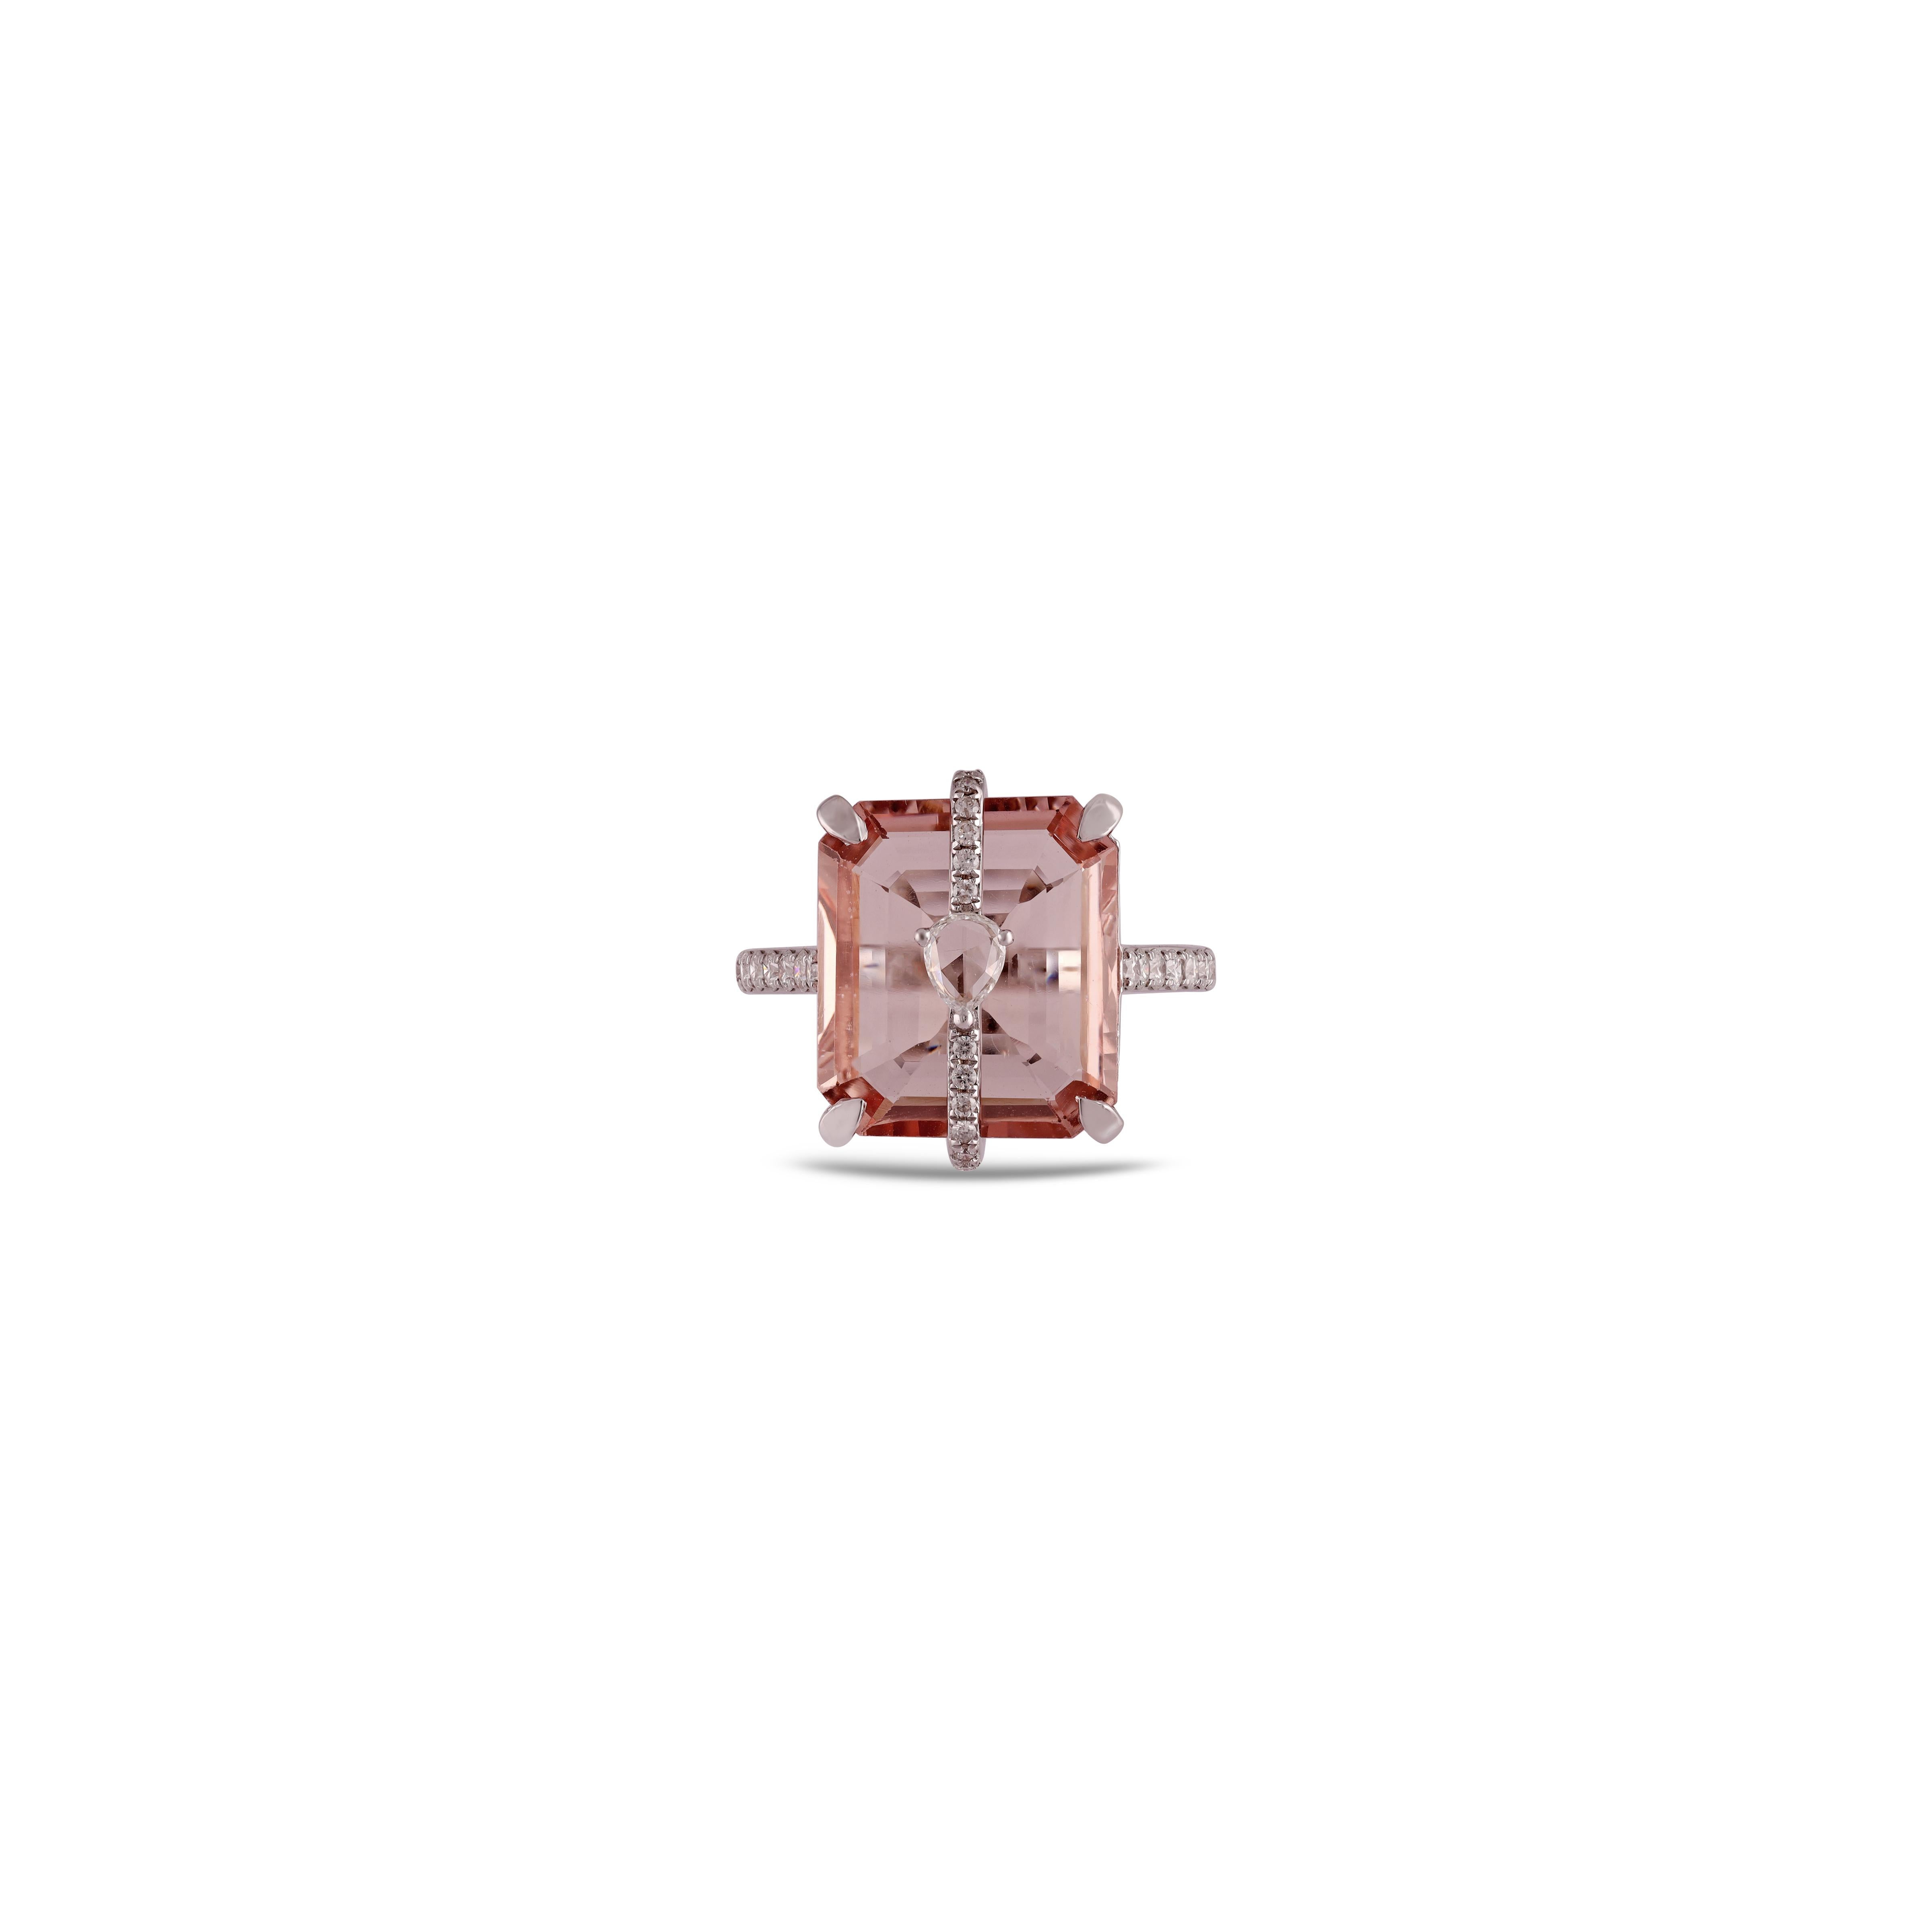 If you are looking for Morganite Ring, this is the ultimate find, (7.66 carats) of the finest Morganite color is the focal point.  Perfectly matched in color, size, luster, and transparency. The color is what you want. The diamonds  surrounding the